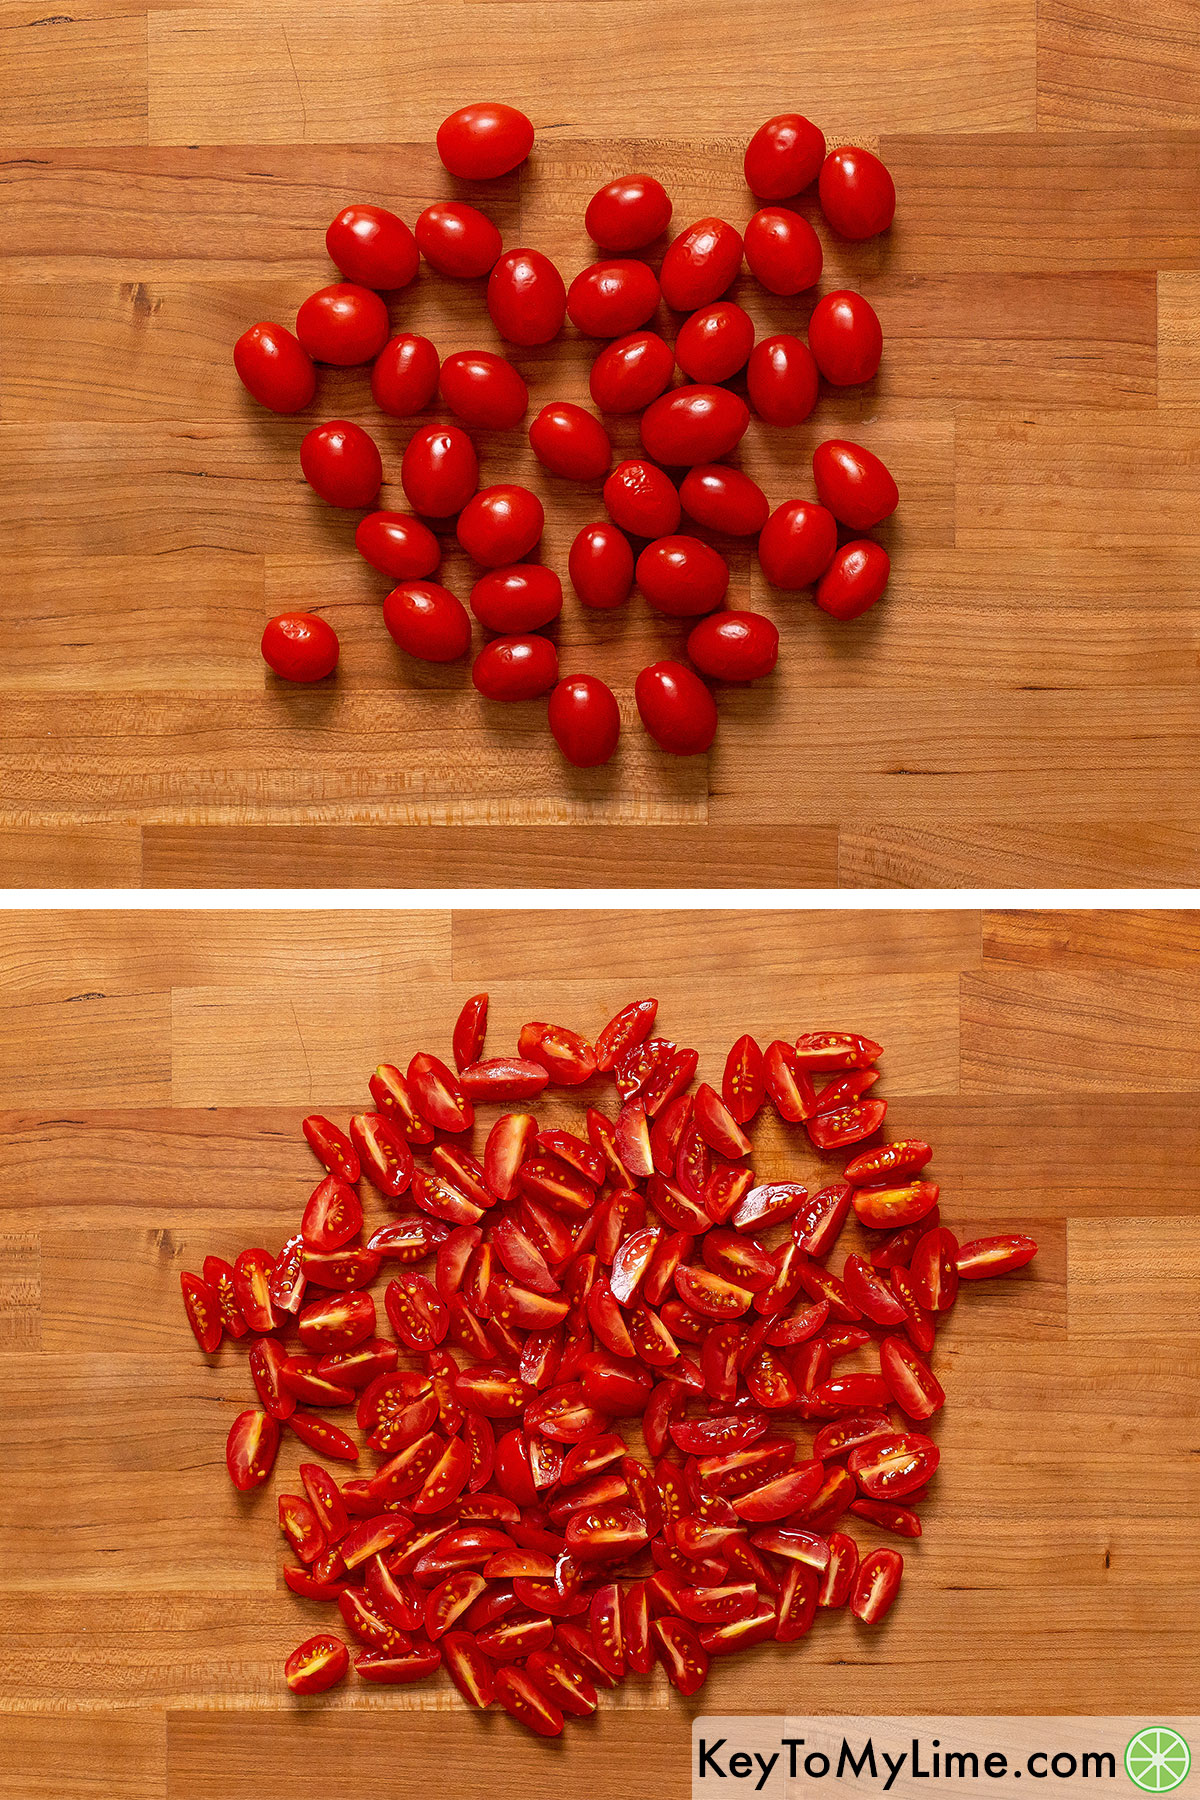 Cutting cherry tomatoes into quarters.